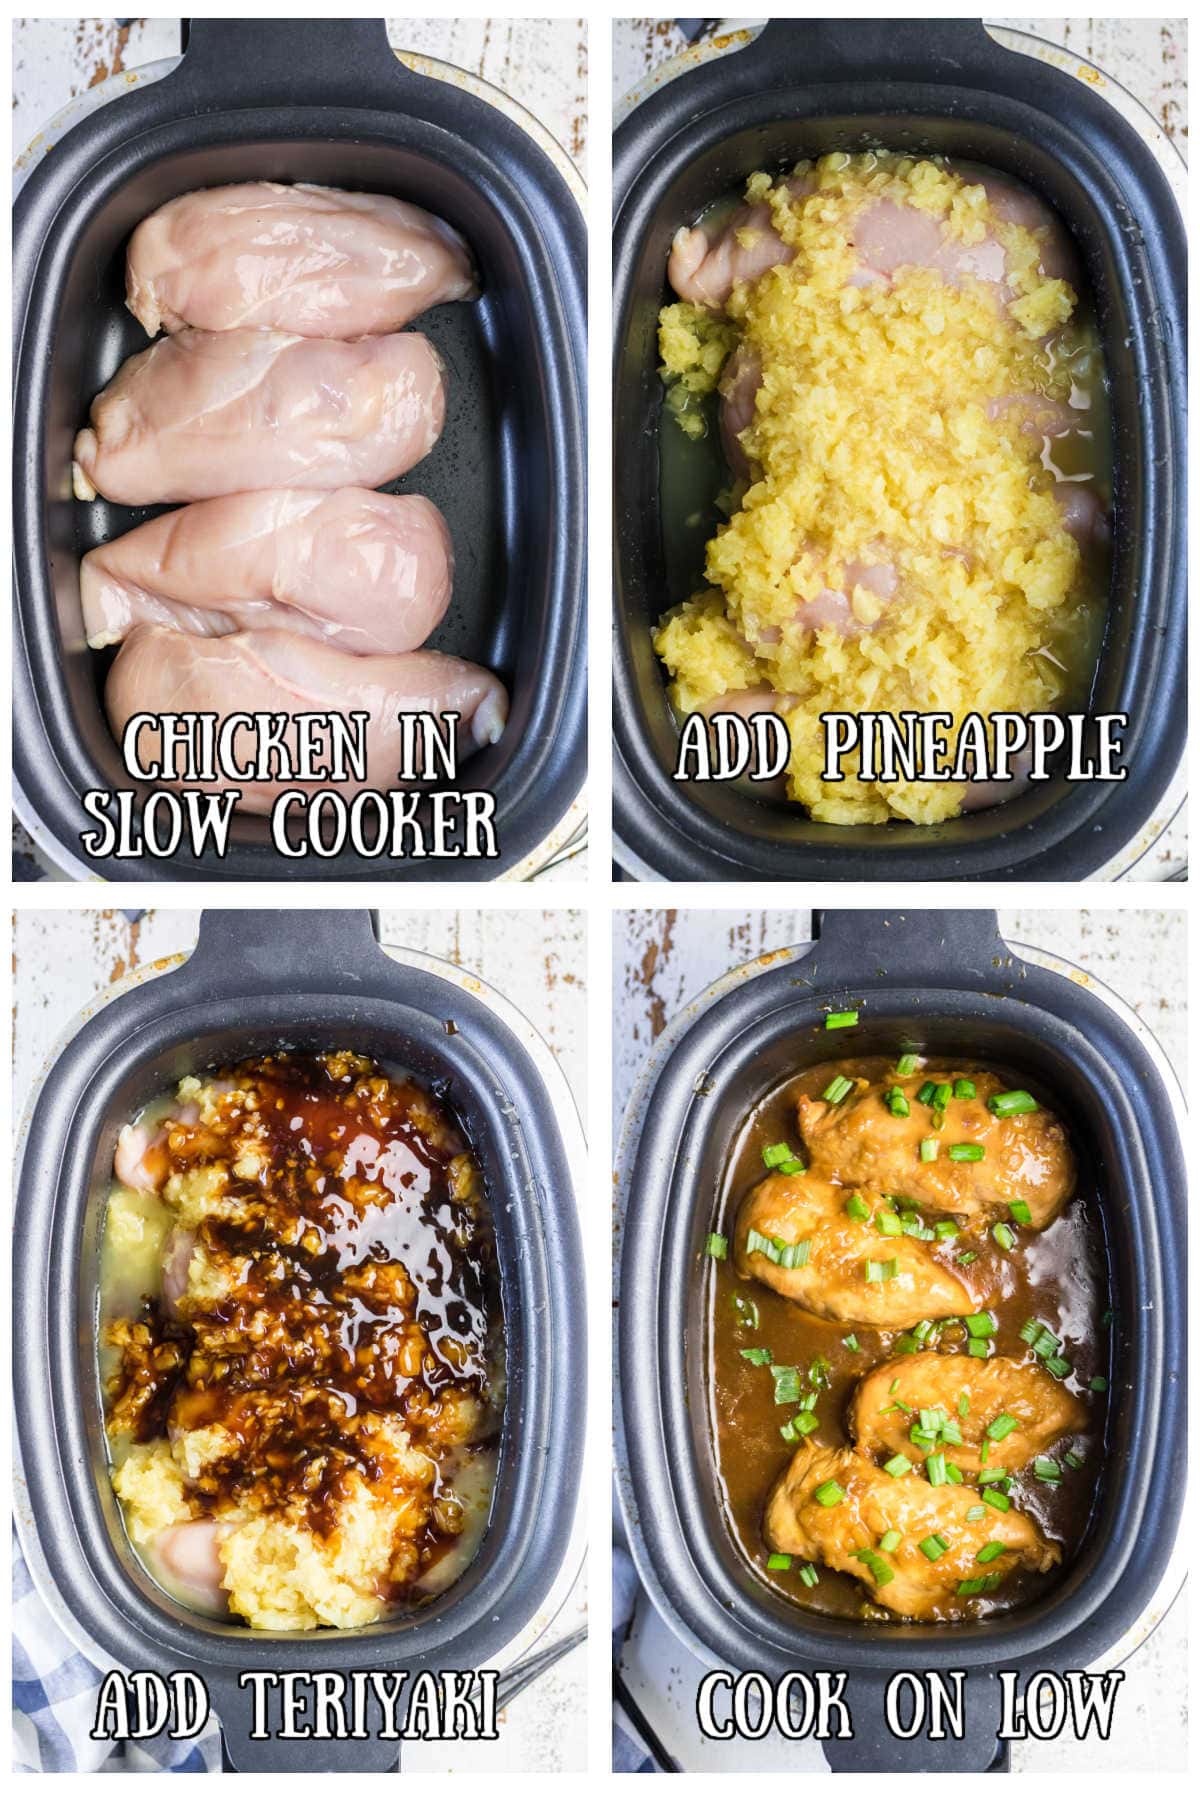 Step by step images showing how to make pineapple teriyaki chicken in the slow cooker.